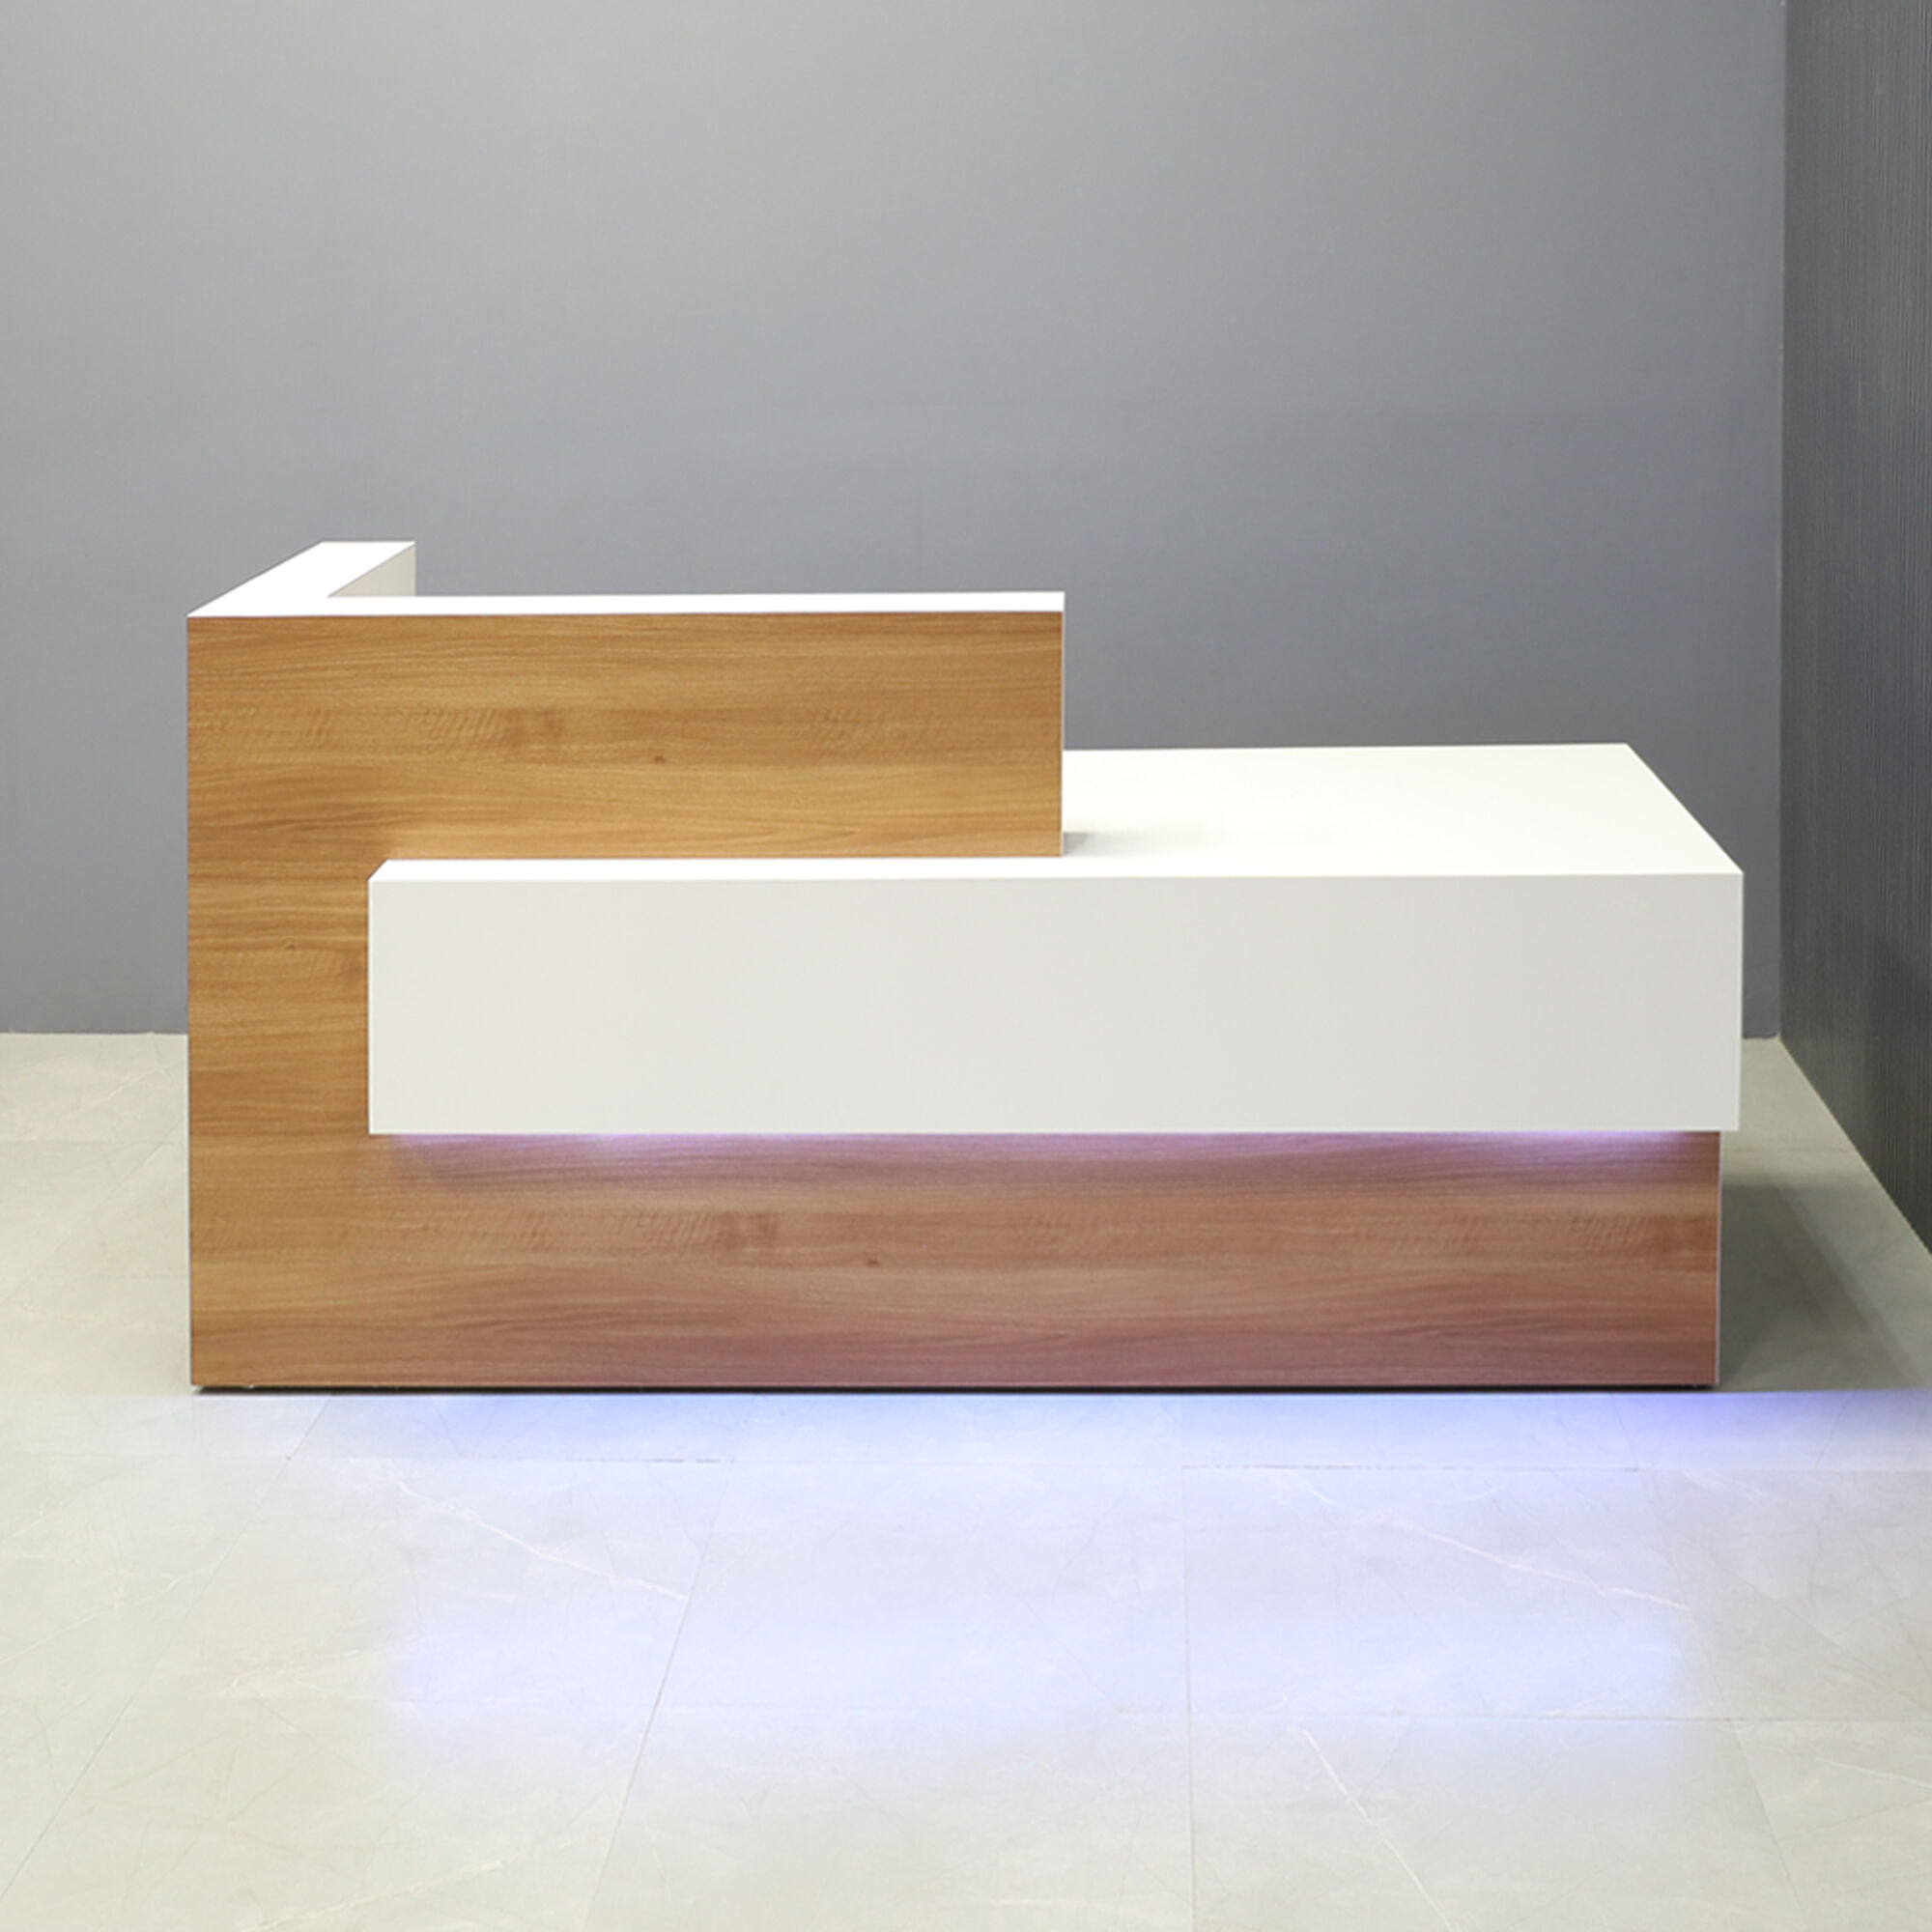 84-inch Atlanta Reception Desk in brazilwood countertop & base, dover off-white matte laminate workspace & front accent, with multi-colored LED, shown here.